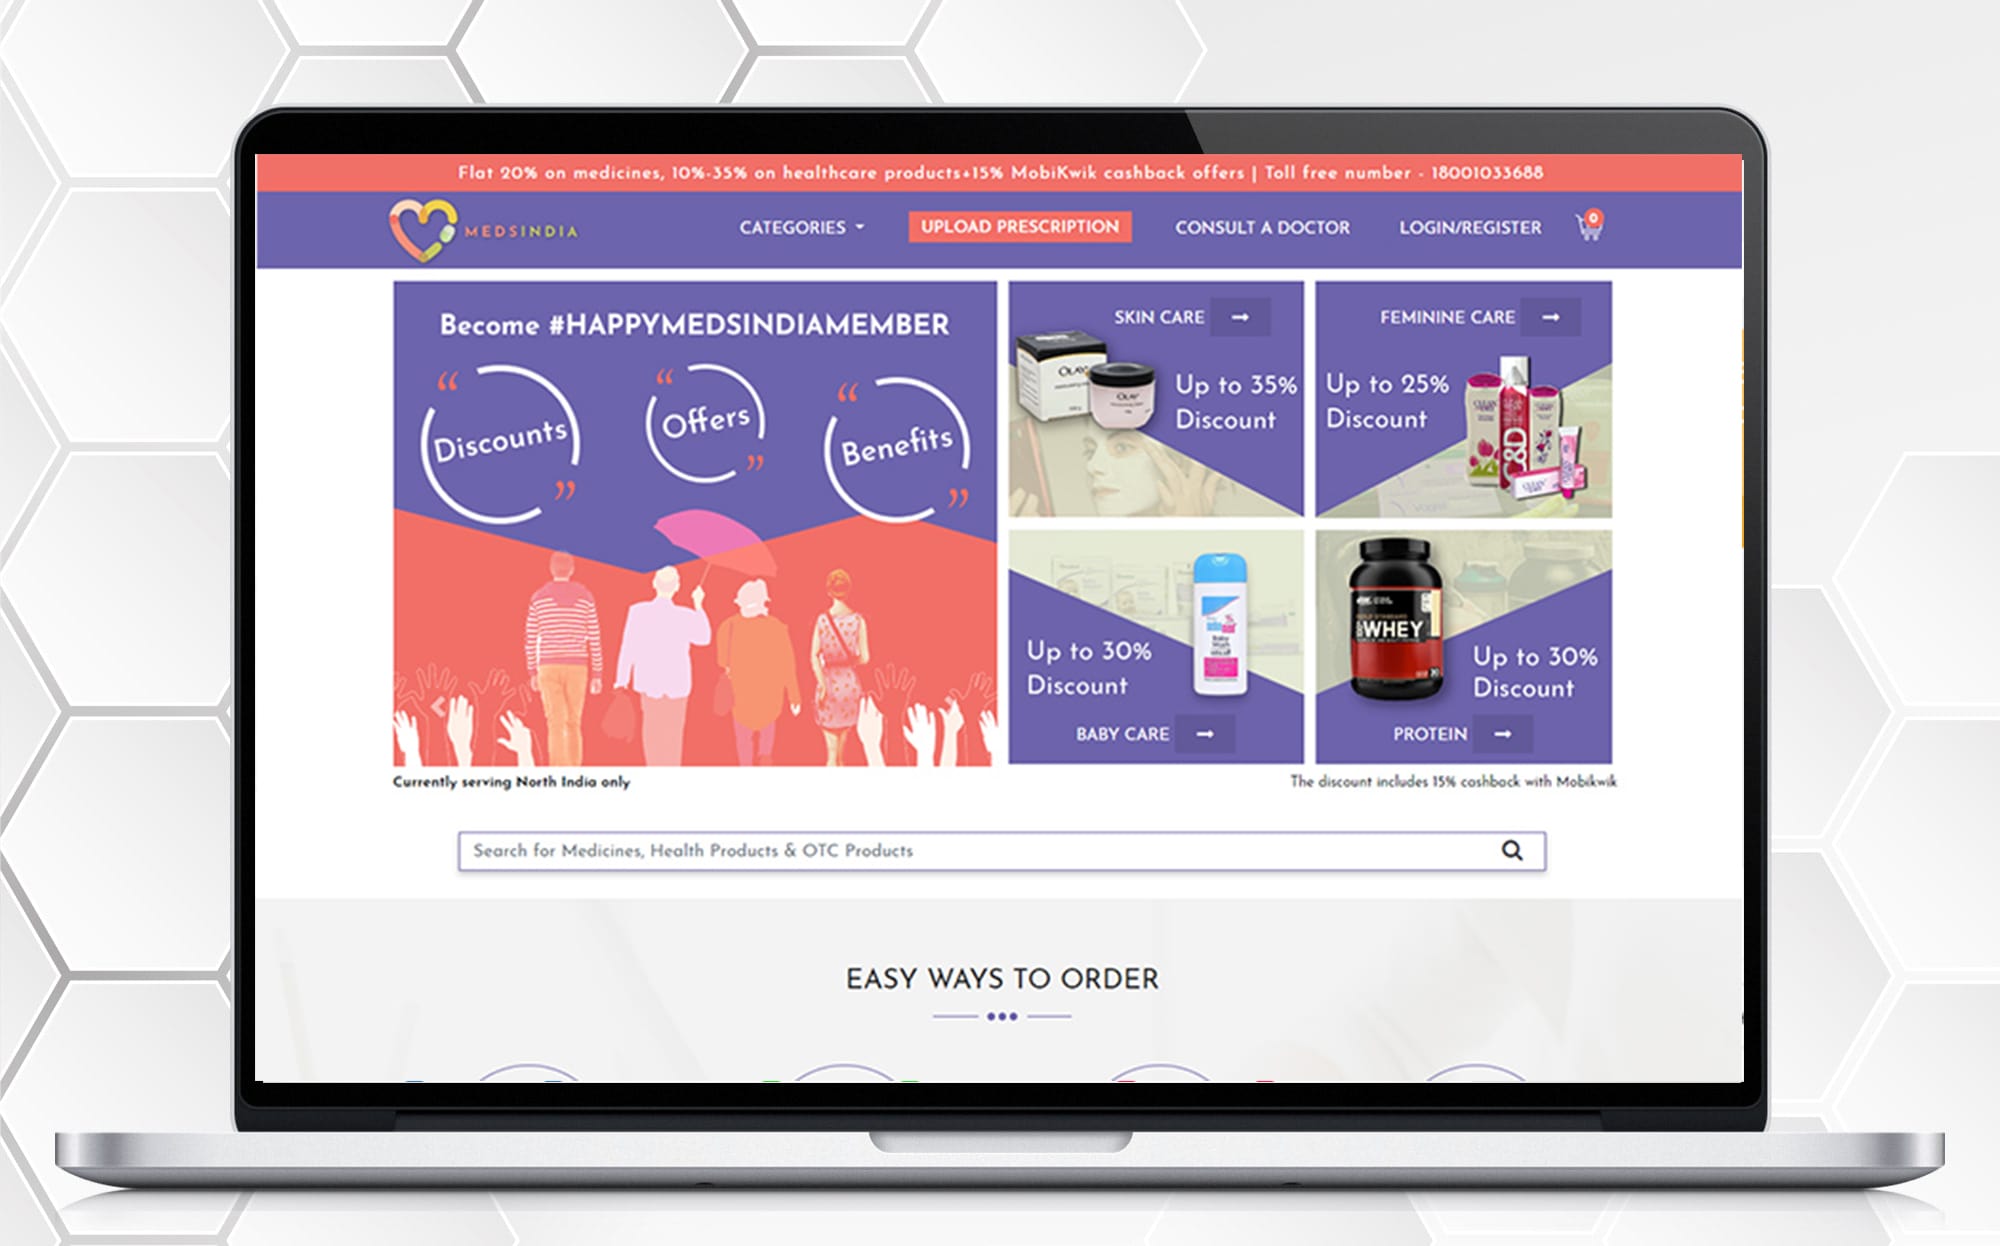 1mg-type website and mobile app for an online medicine marketplace